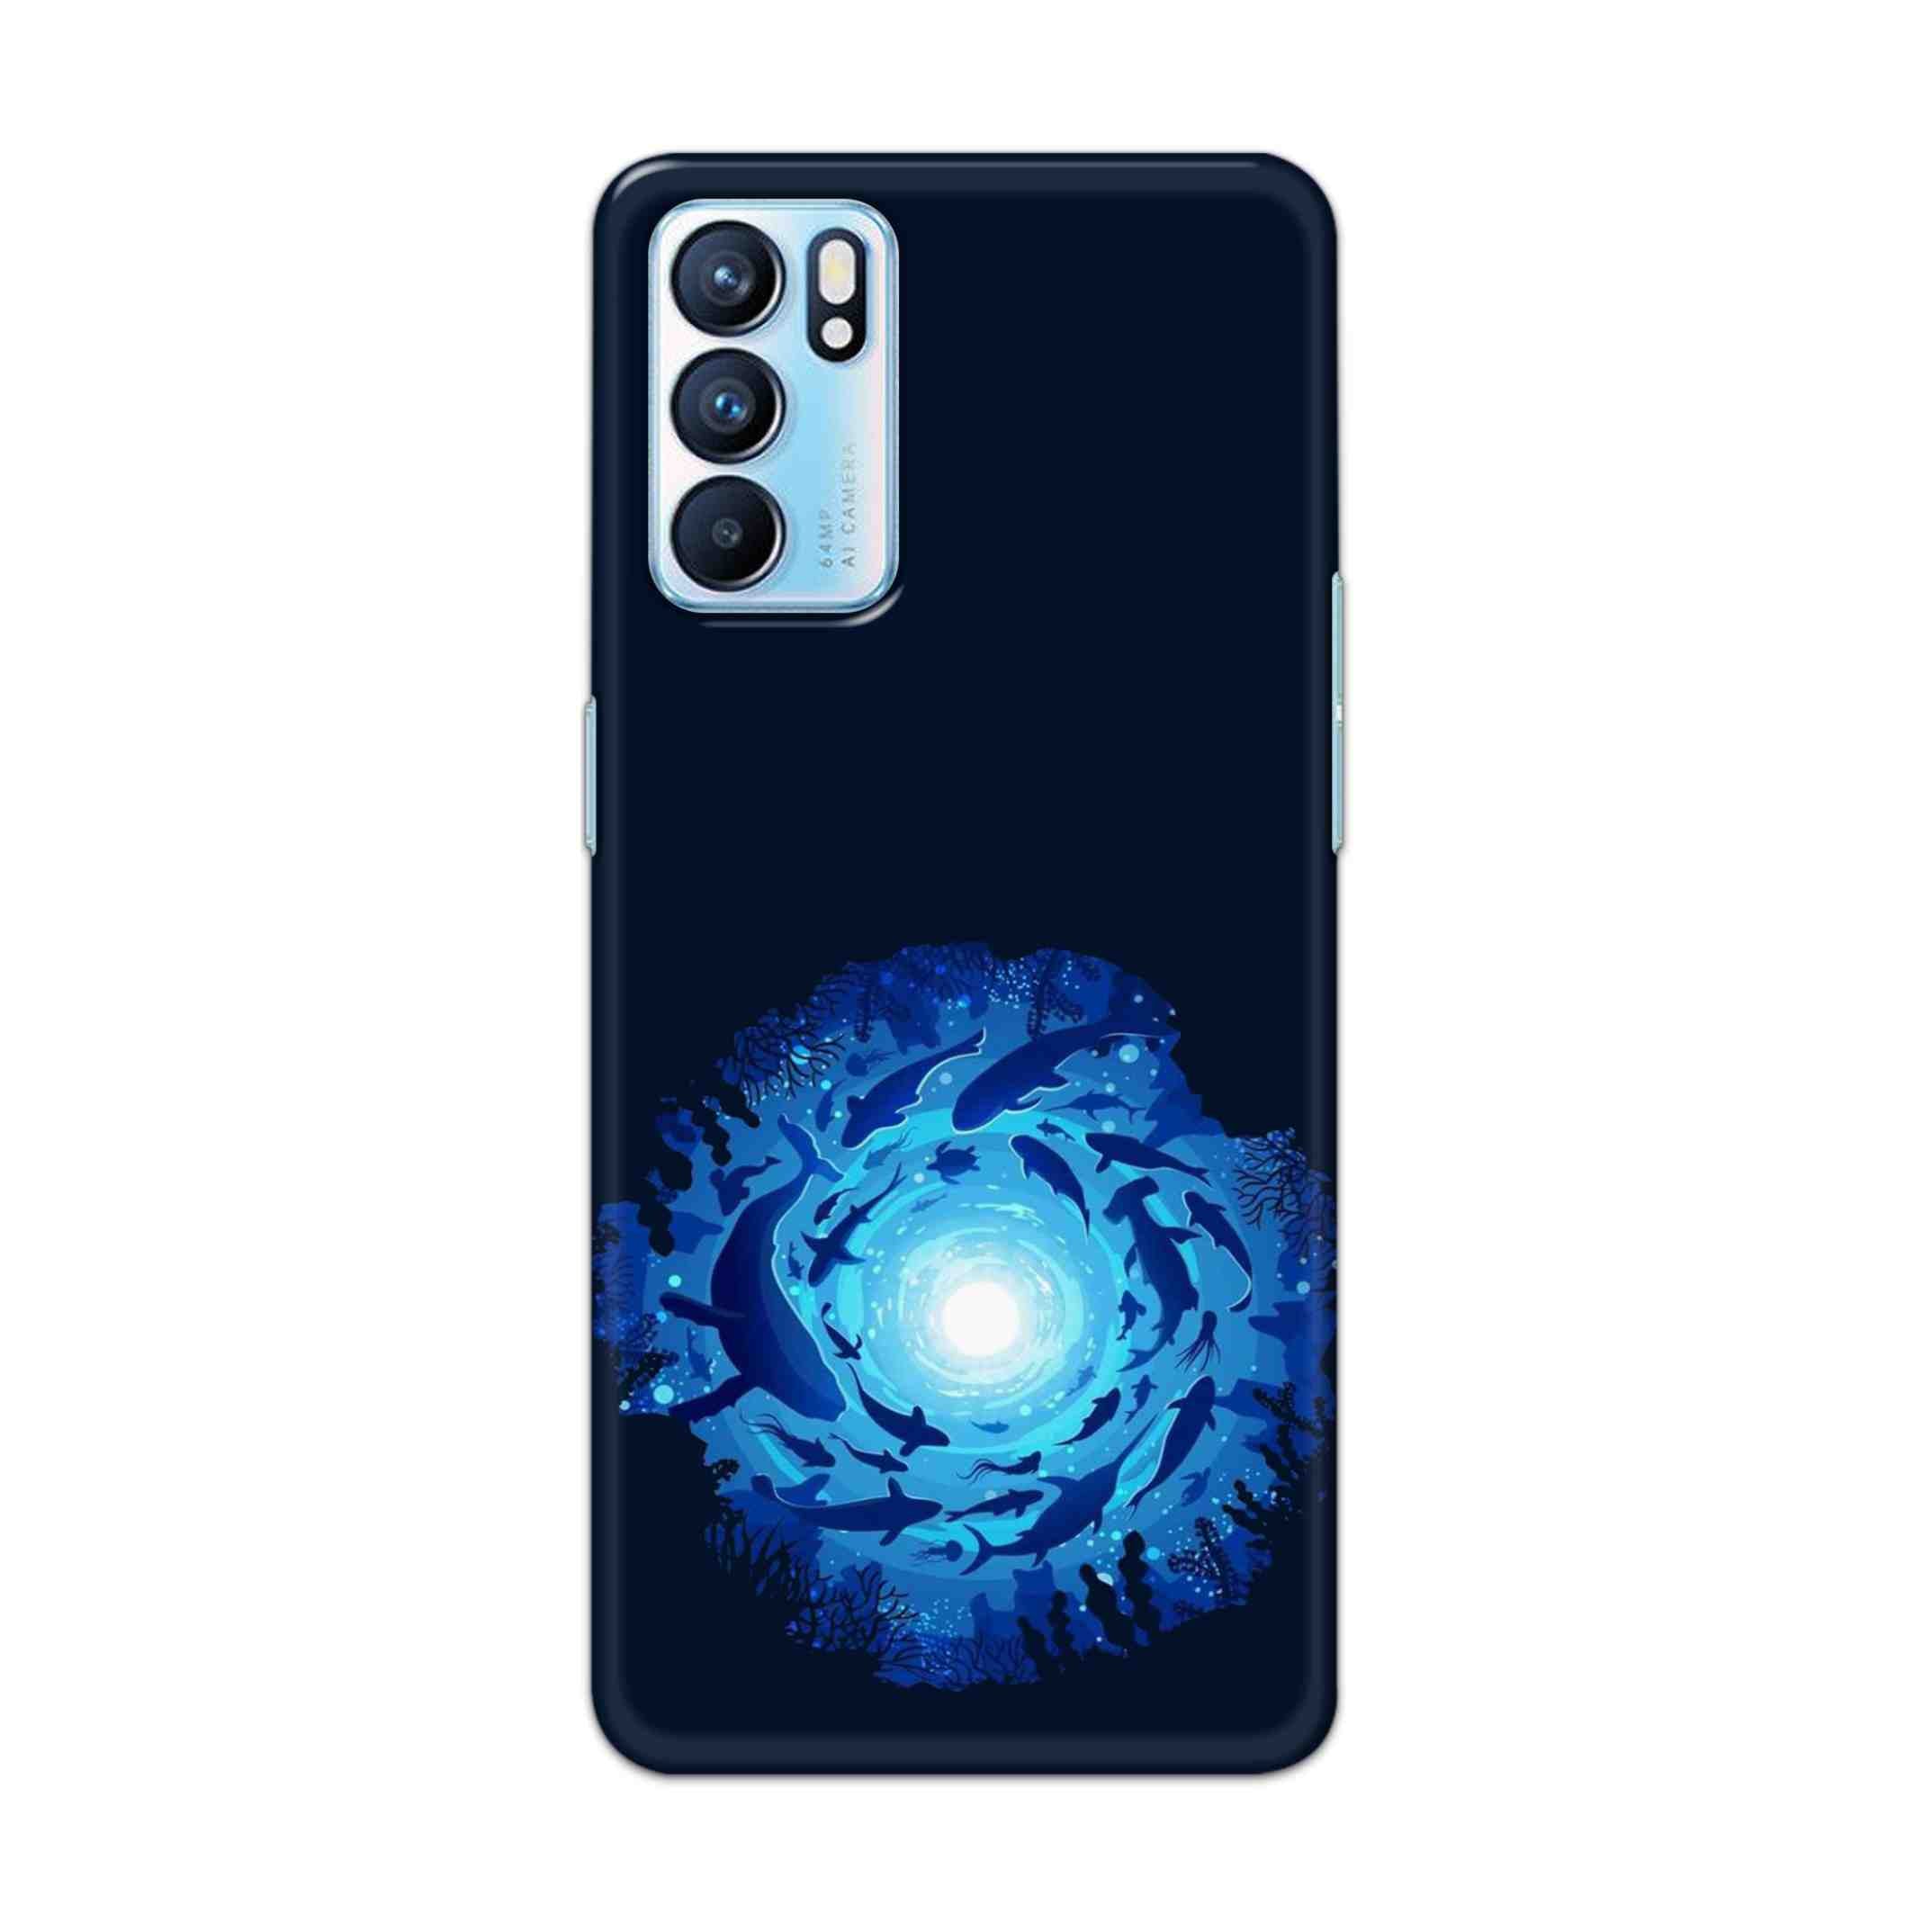 Buy Blue Whale Hard Back Mobile Phone Case Cover For OPPO RENO 6 Online